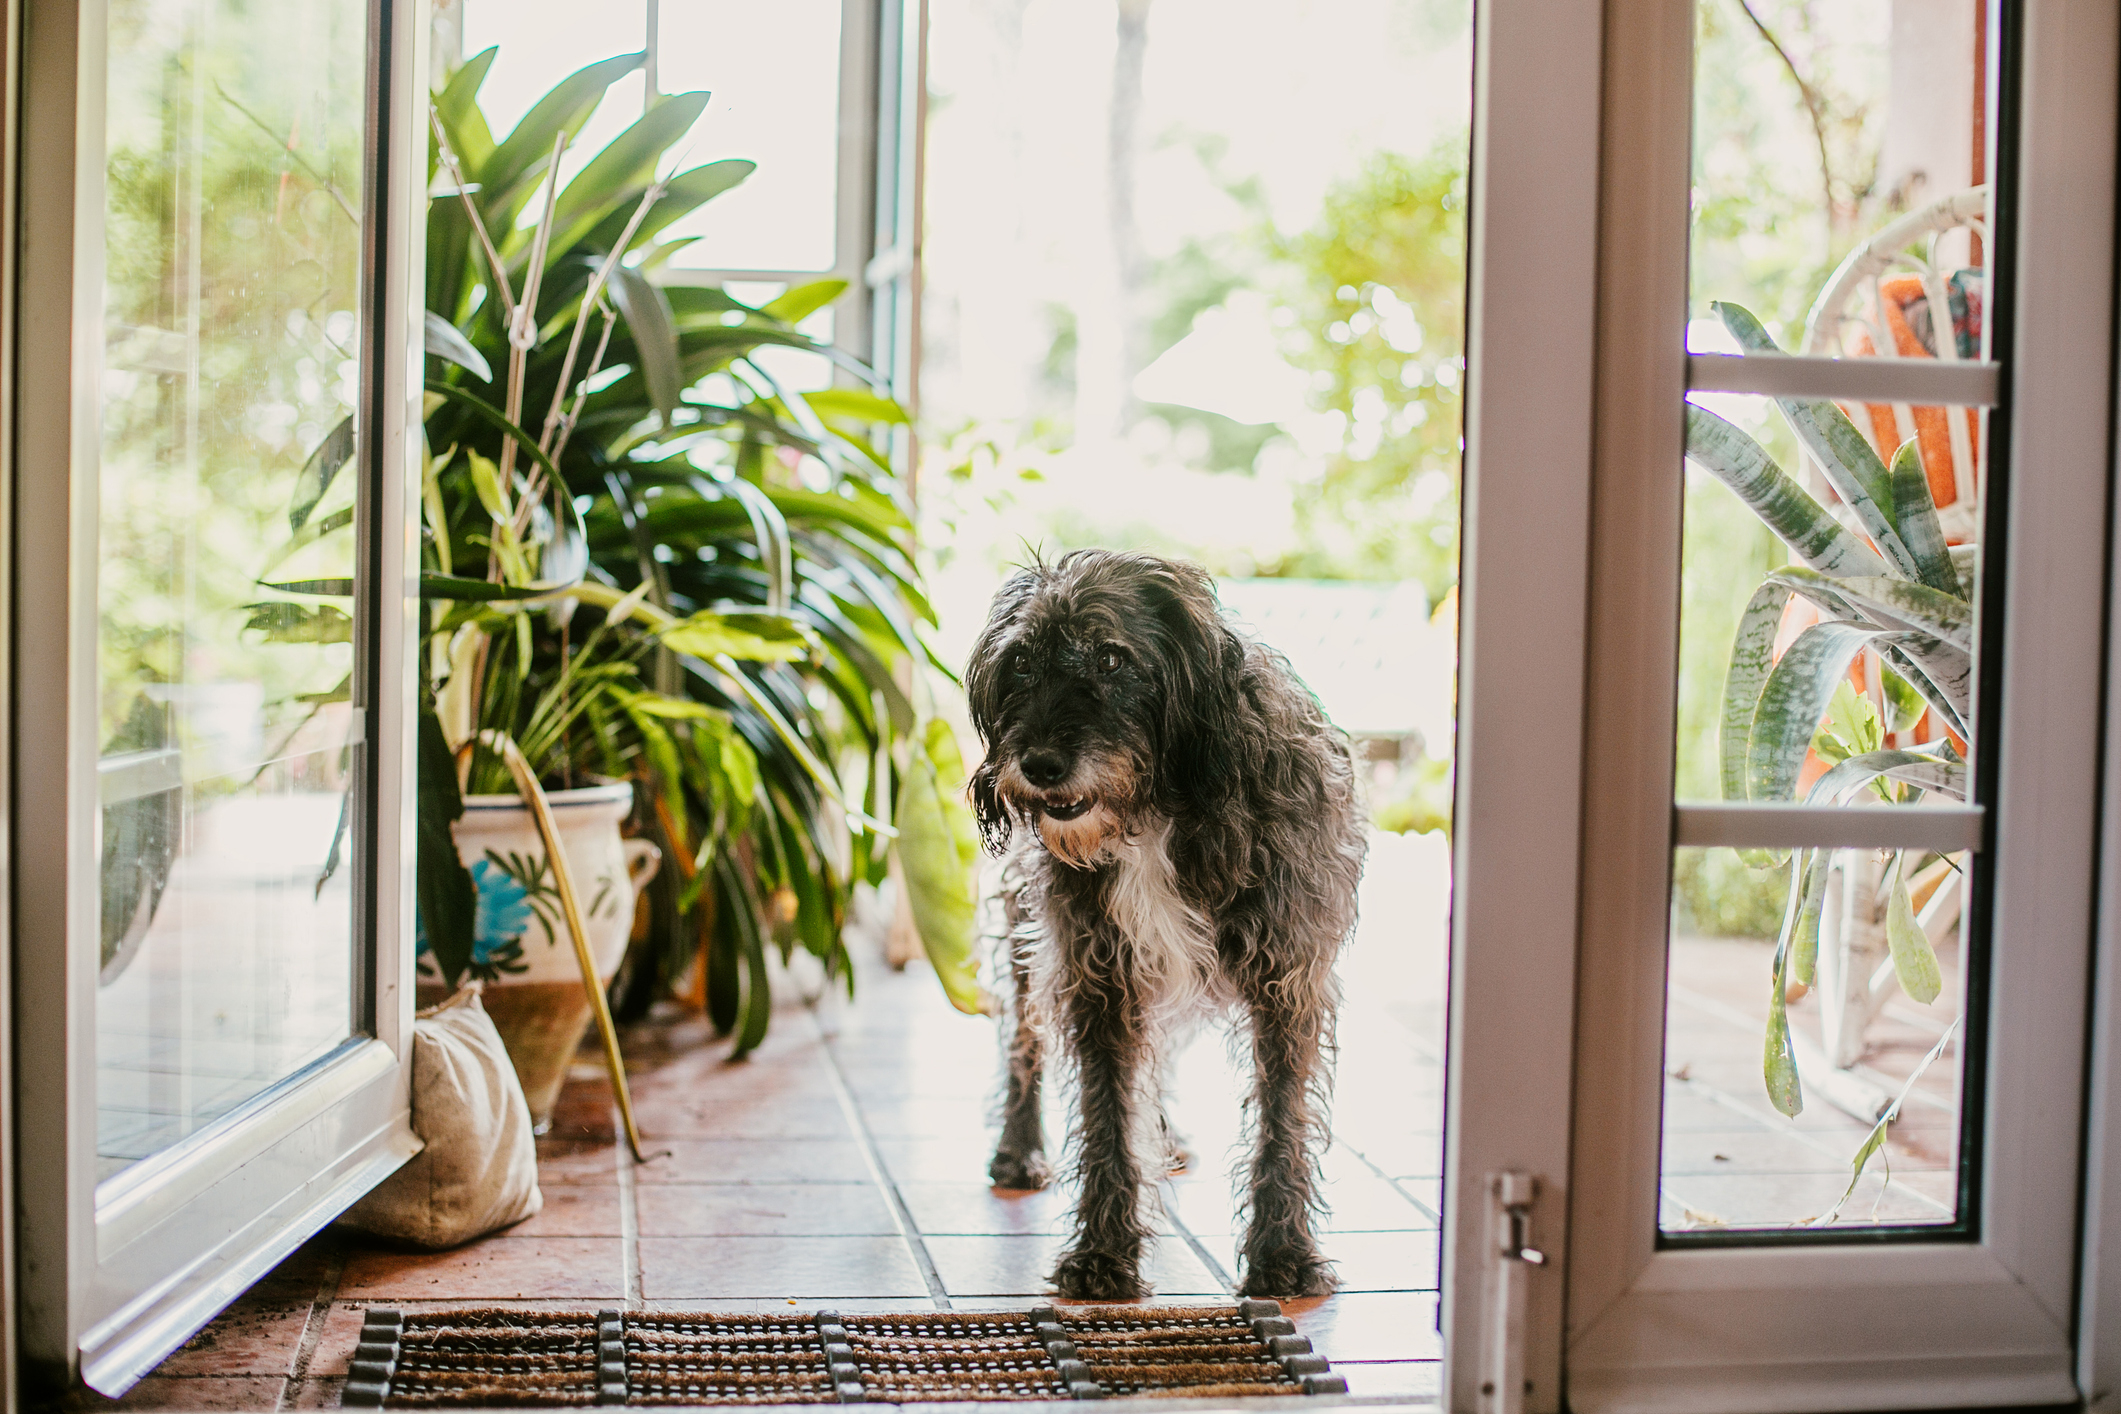 Dog entering a room through an open door, with indoor plants visible